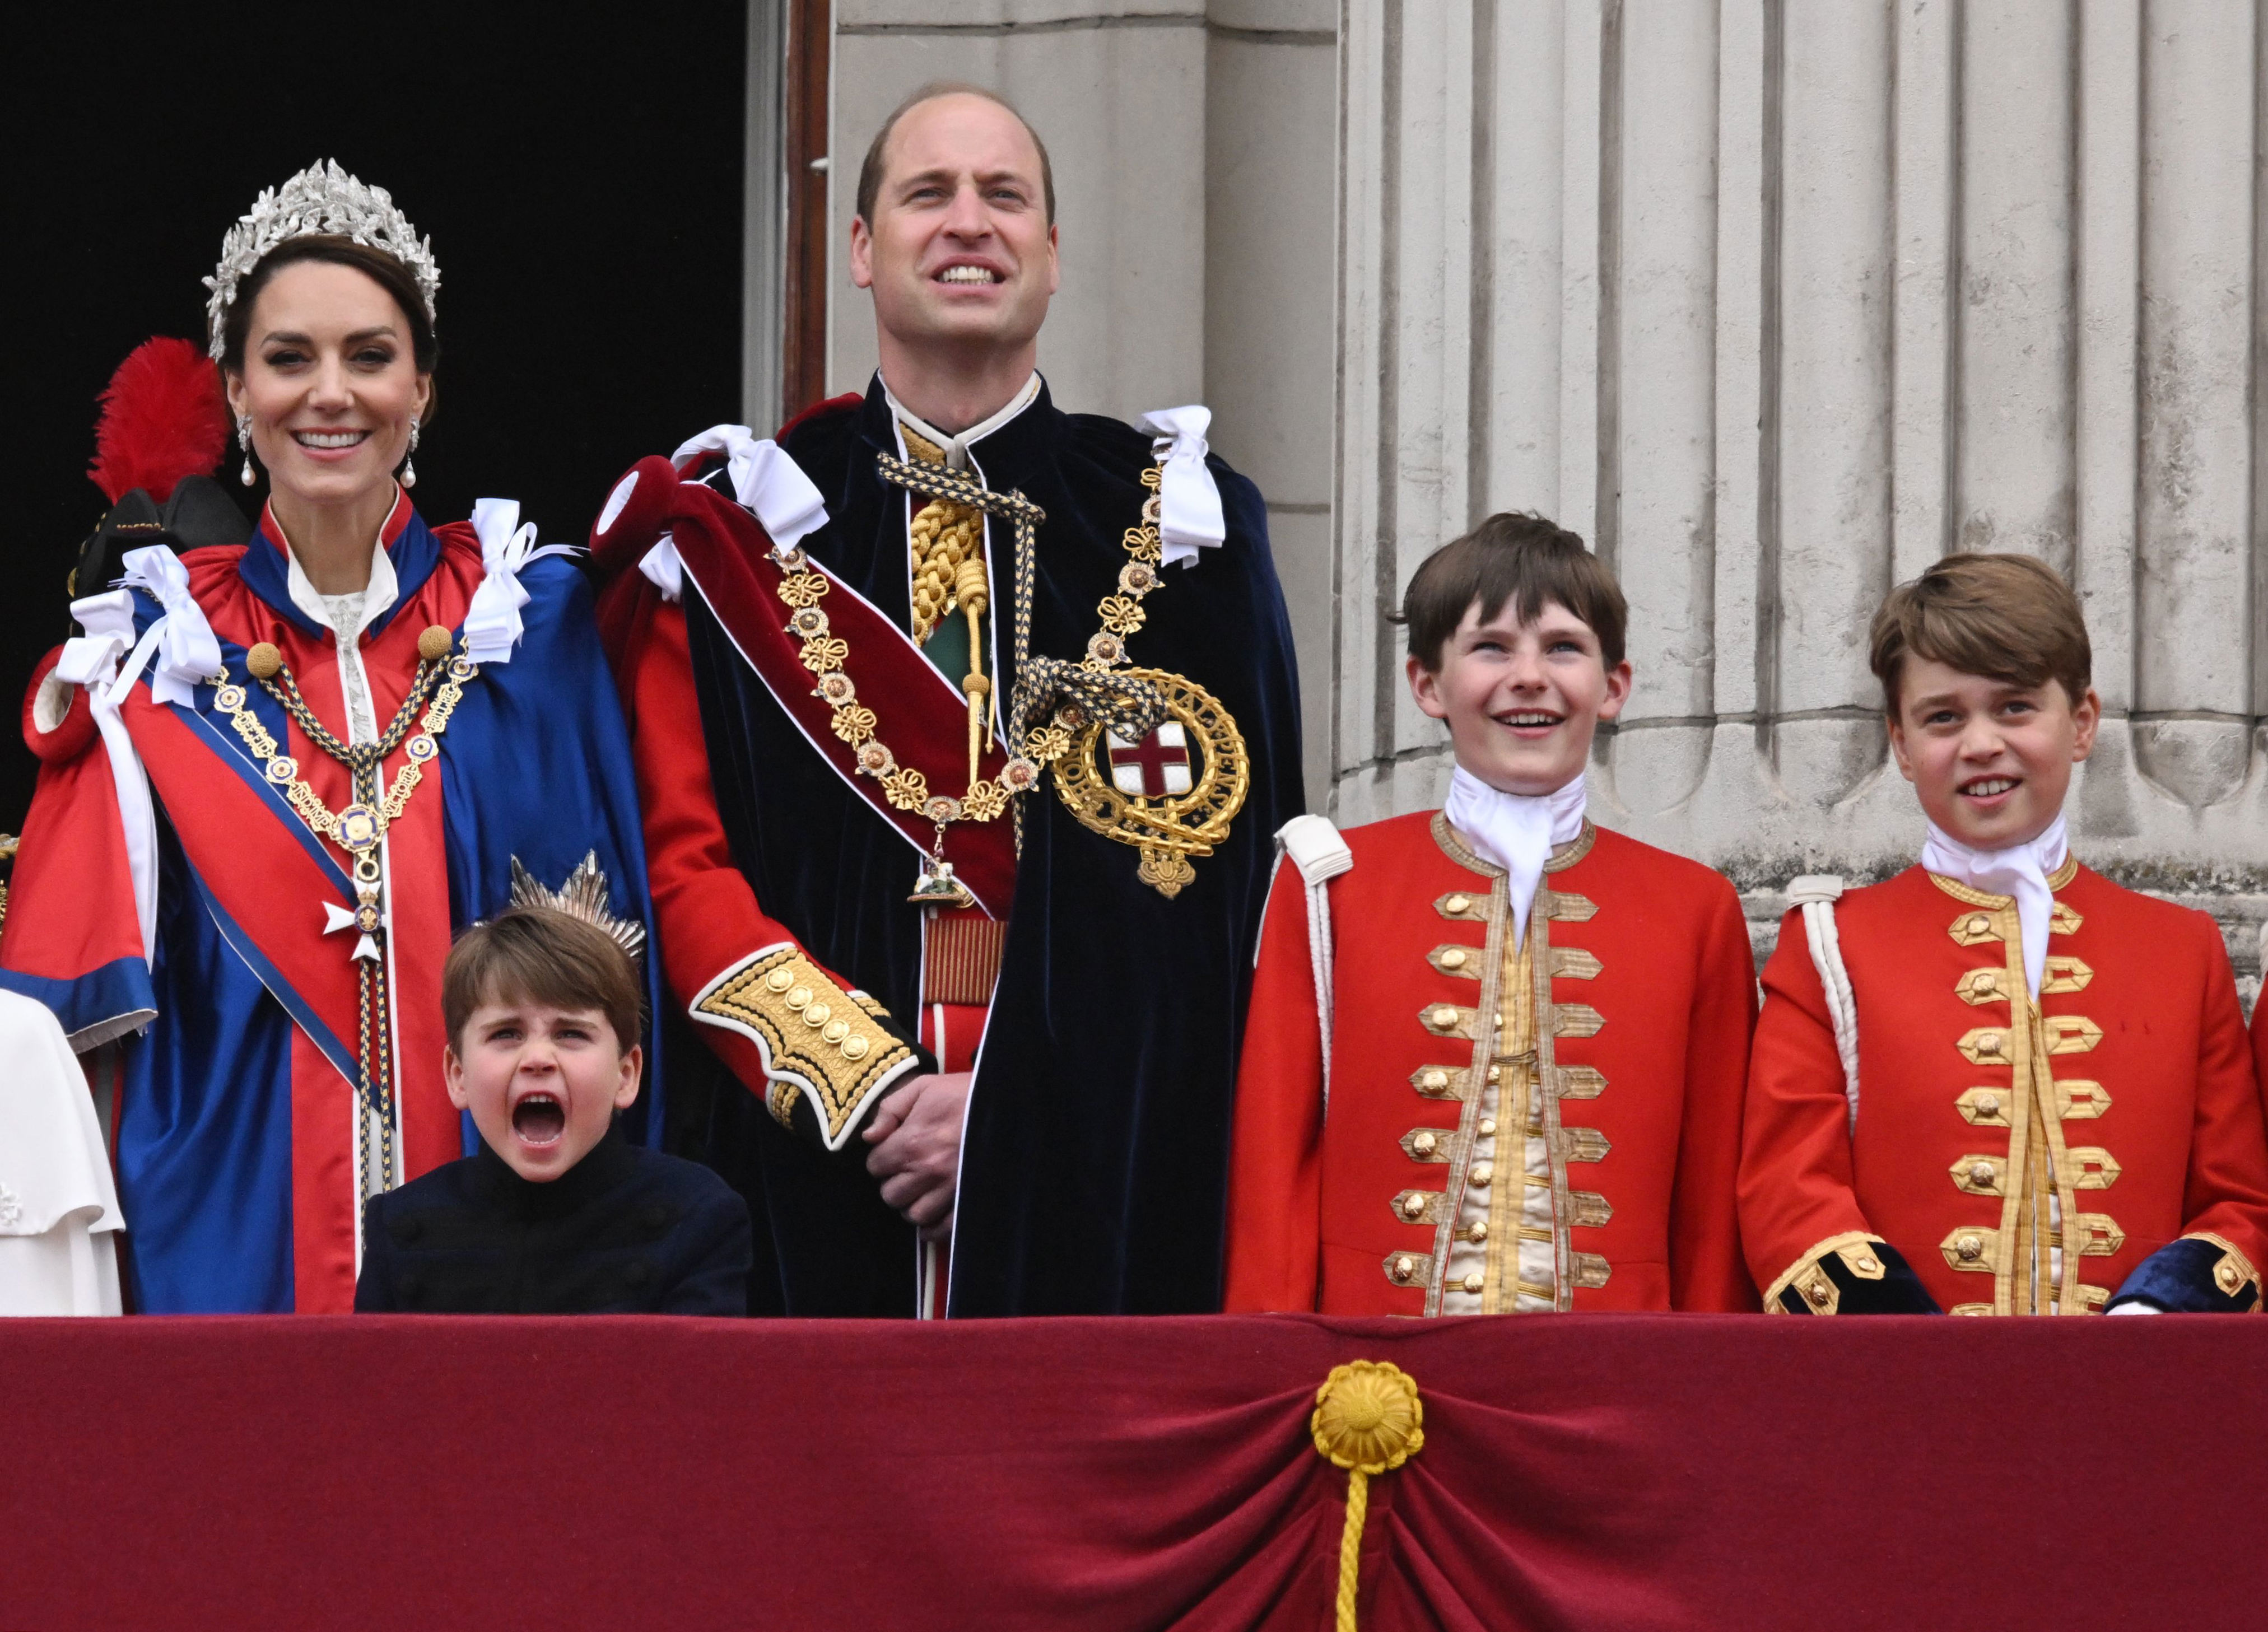 <p>Prince Louis shouted while standing with his parents -- Princess Kate and <a href="https://www.wonderwall.com/celebrity/profiles/overview/prince-william-482.article">Prince William</a> -- and brother Prince George and another page while on the balcony of Buckingham Palace in London following the <a href="https://www.wonderwall.com/celebrity/the-coronation-of-king-charles-iii-and-queen-camilla-the-best-pictures-of-all-the-royals-at-this-historic-event-735015.gallery">coronation</a> of King Charles III on May 6, 2023.</p>